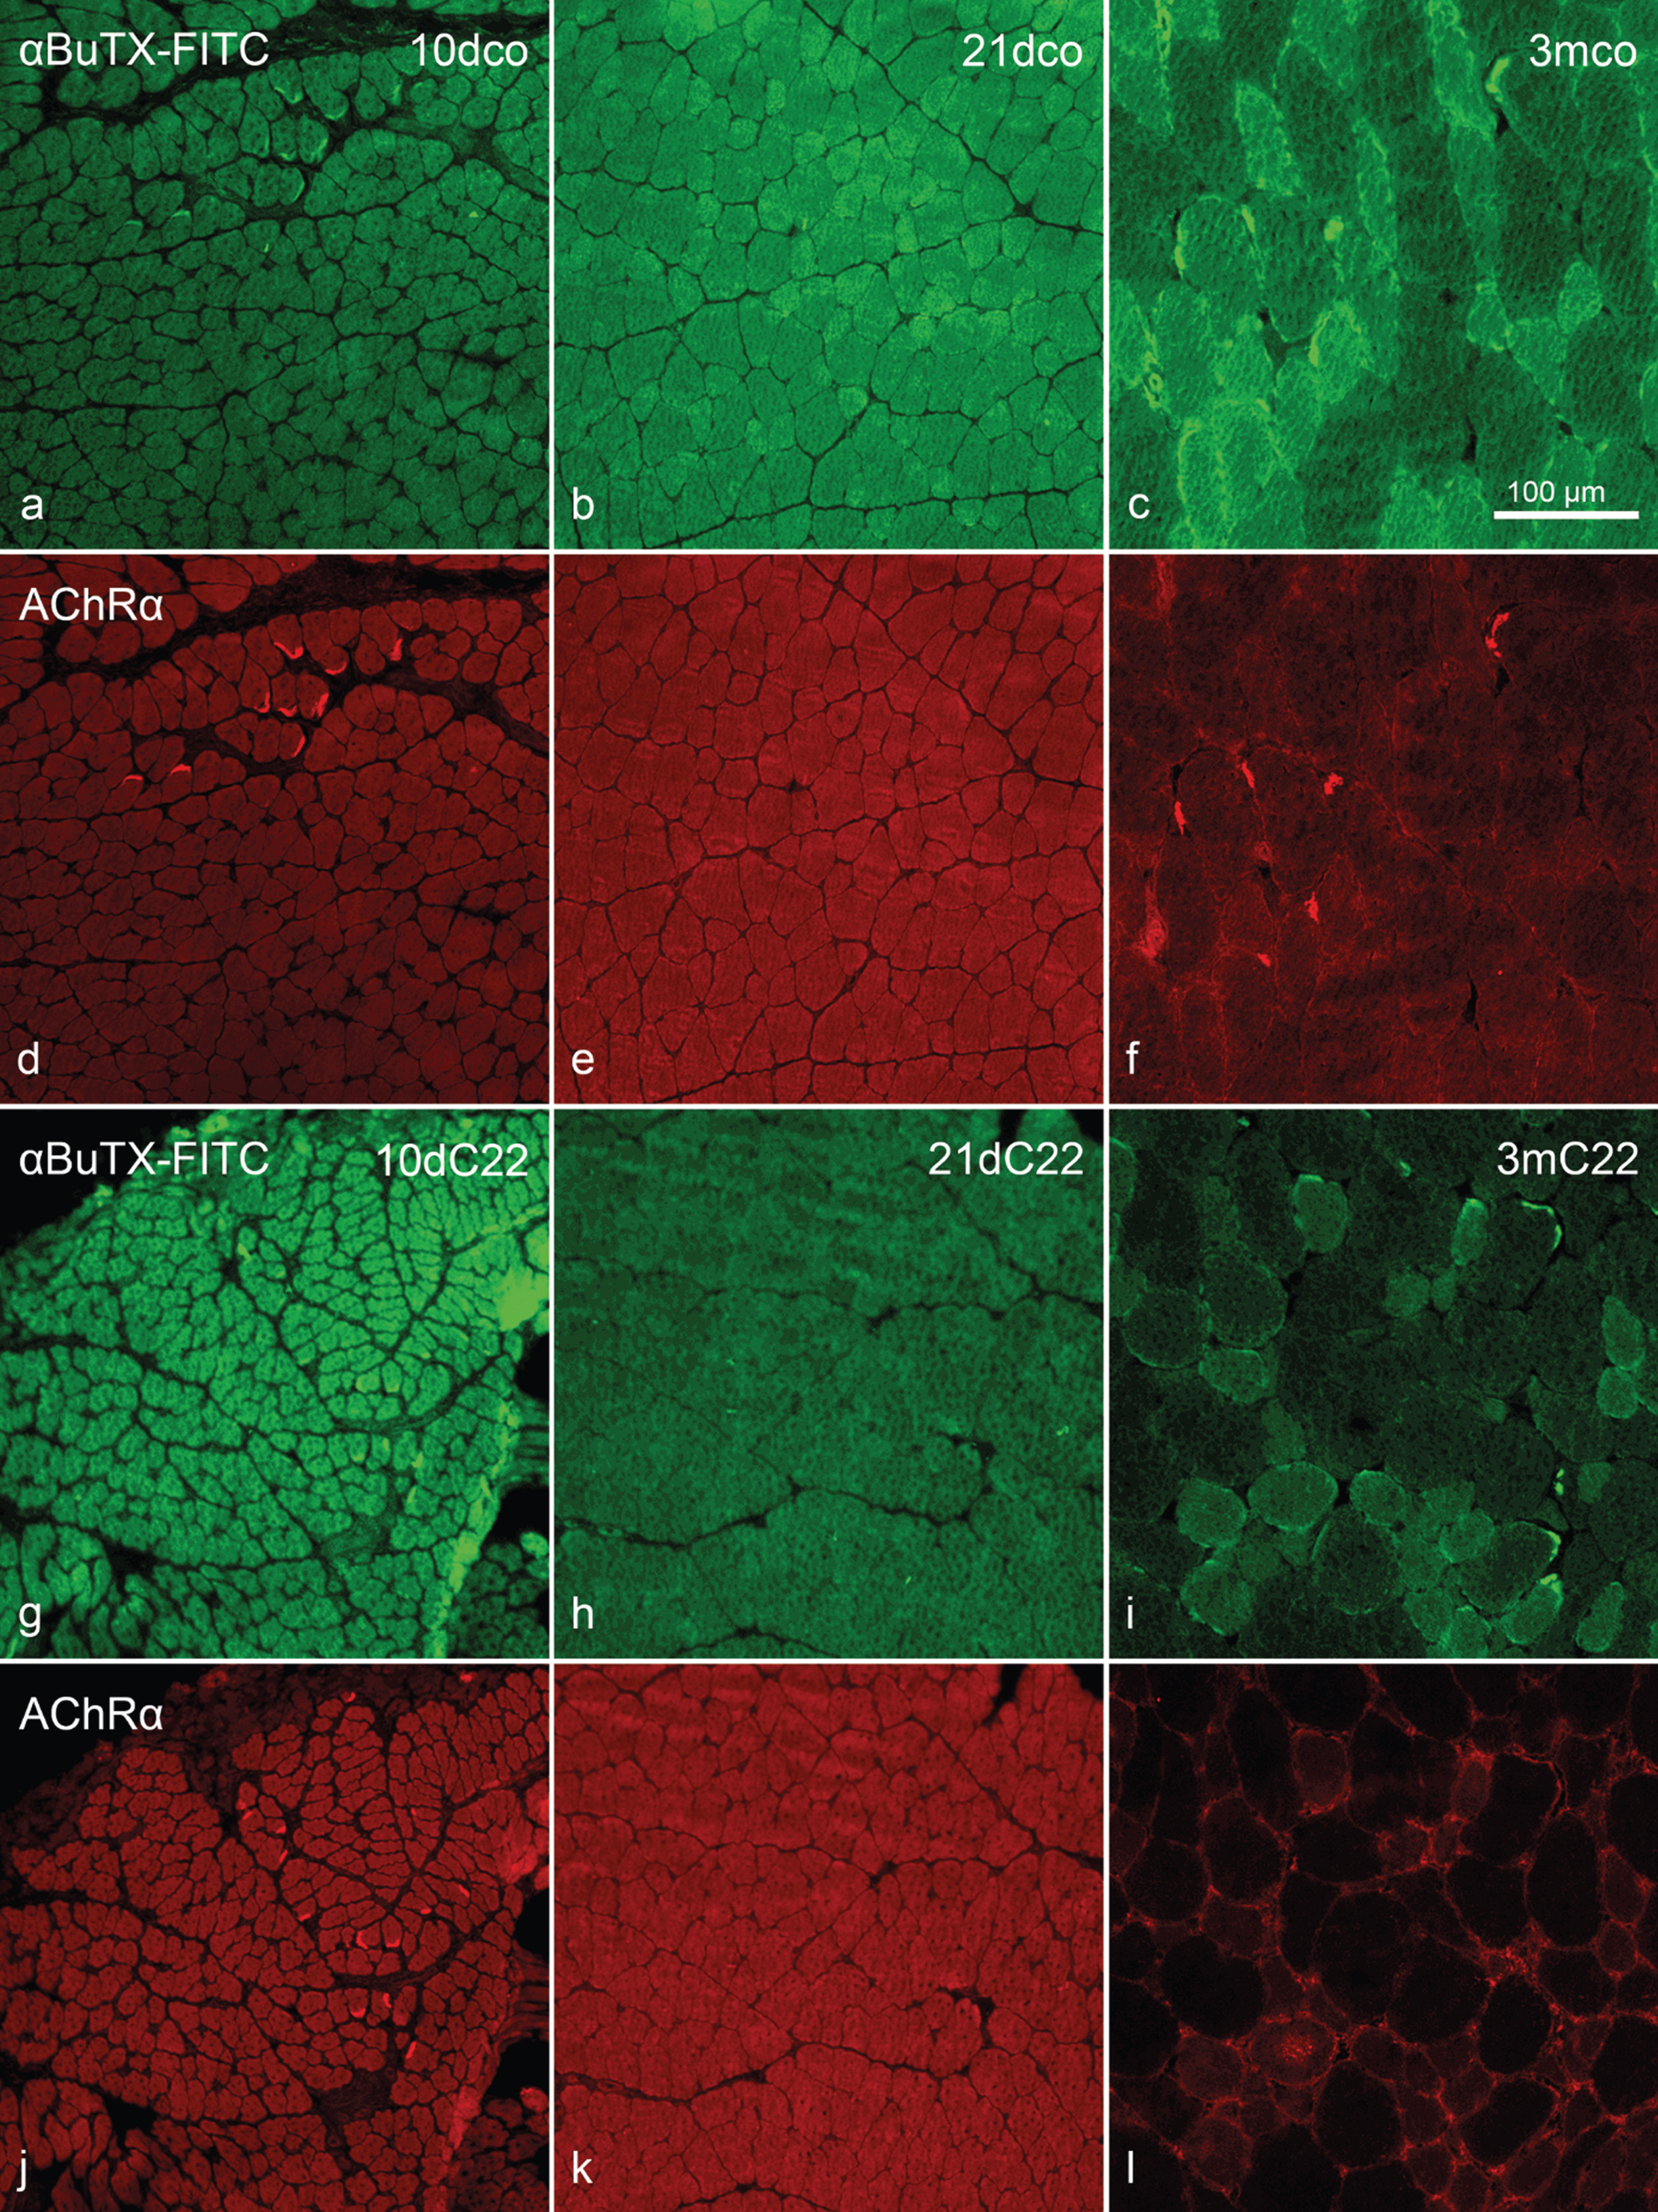 Detection of acetylcholine receptor α-subunit by (immuno)histochemistry. Double staining FITC-conjugated α-bungarotoxin (α-BuTX-FITC; a–c and g–i) and anti-acetylcholine receptor (α-subunit) (aAChRα; d–f and j–l). 10dco (a, d), 10dC22 (g, j), 21dco (b, e), 21dC22 (h, k), 3mco (c, f) and 3mC22 (i, l). Intense reactivity at neuromuscular endplates in a, c, d, f, g, i, j and l, but on extrajunctional sarcolemma only in l and –weaker –i. Note that while all images of a staining were acquired with identical exposure times, settings etc., further processing for presentation are identical between age groups only. This is due to changing background reactivity, in particular in the mouse-on-mouse situation, in the different ages. Primary magnification was 20fold, scale bar in (c) indicates 100μm for all images.